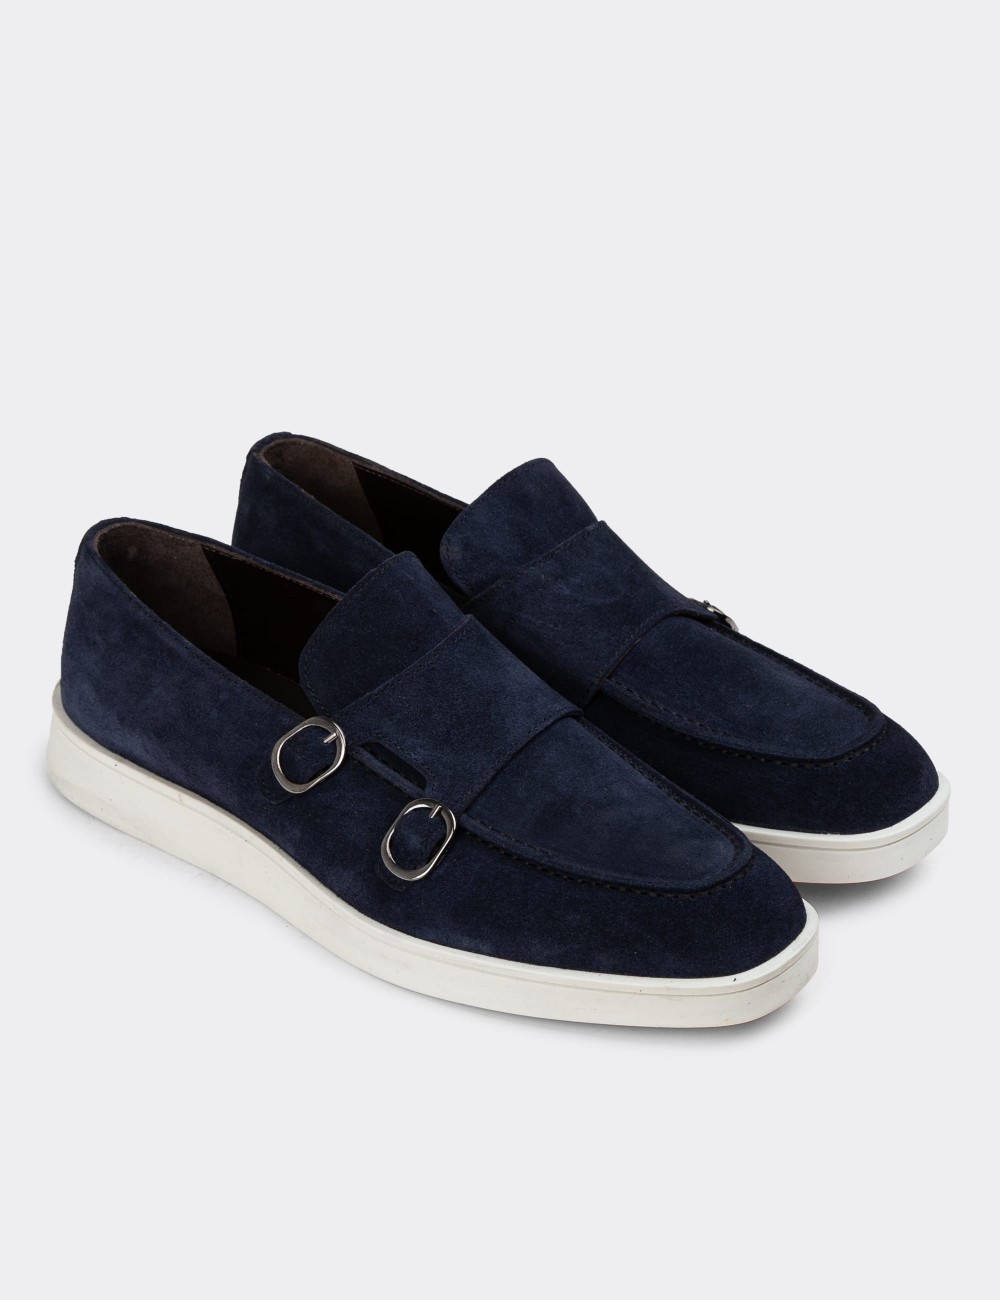 Navy Suede Leather Double Monk-Strap Loafers - 01966MLCVC01